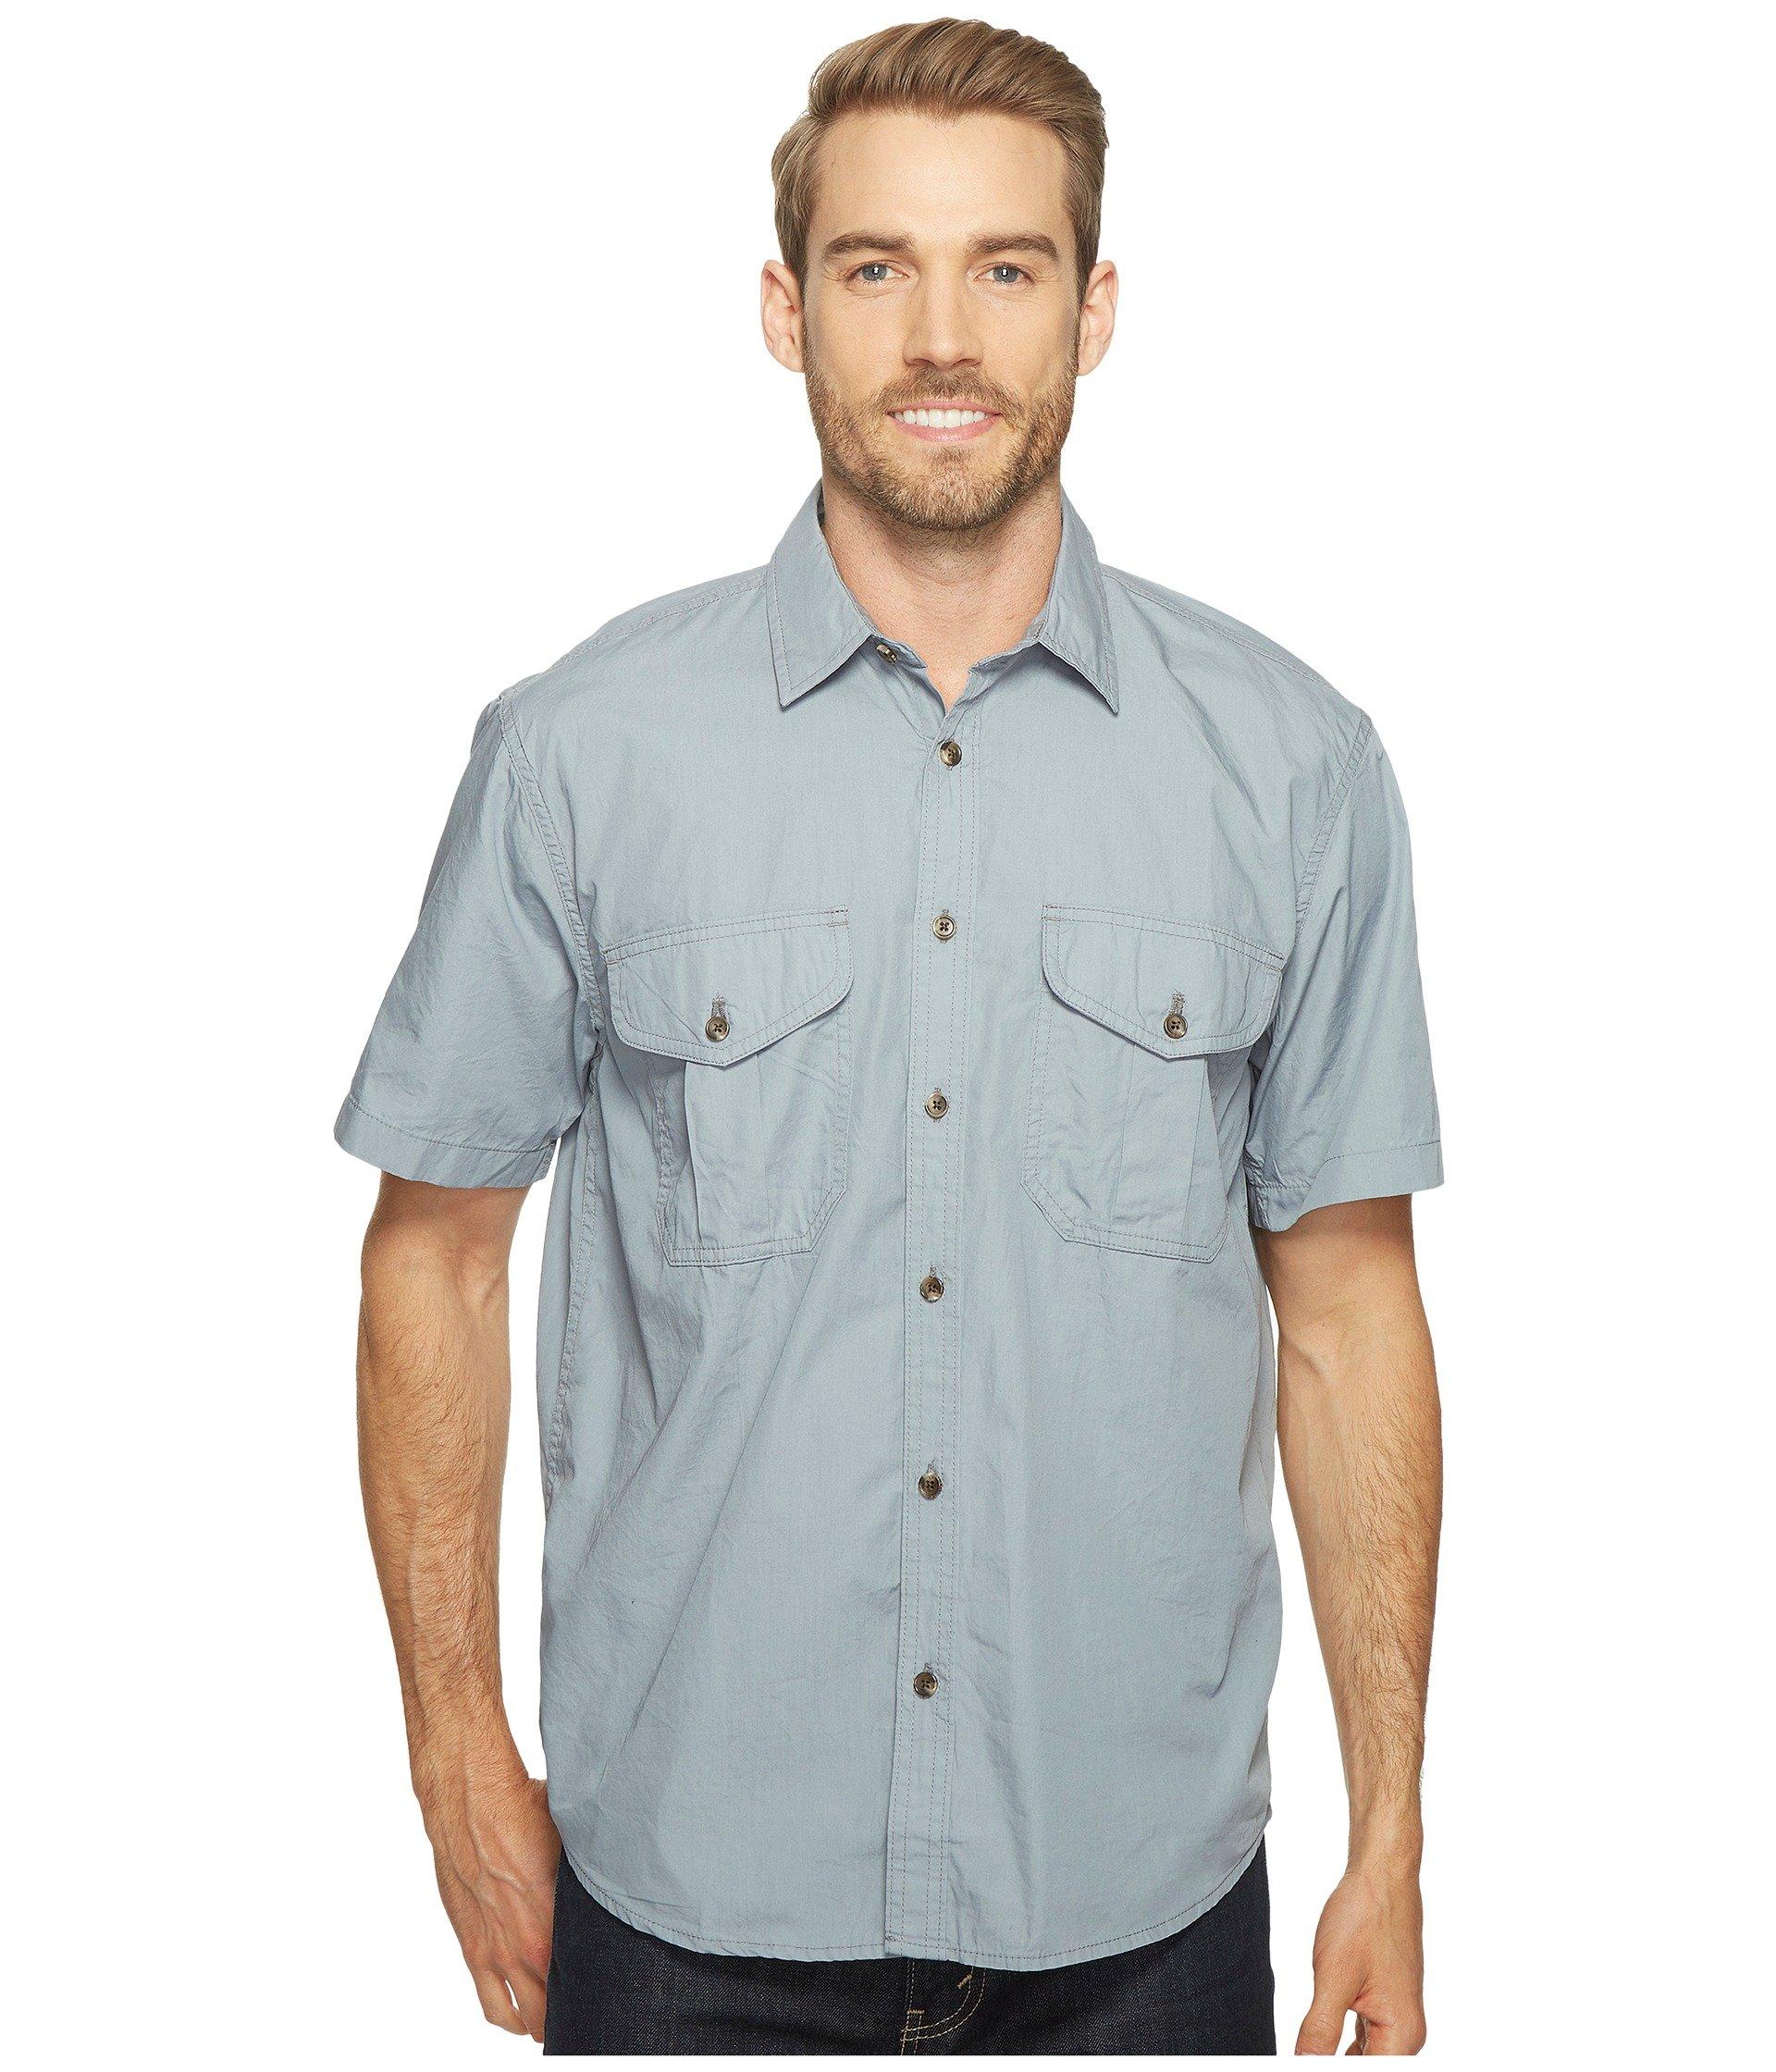 Filson Cotton Short Sleeve Feather Cloth Shirt in Blue for Men - Lyst